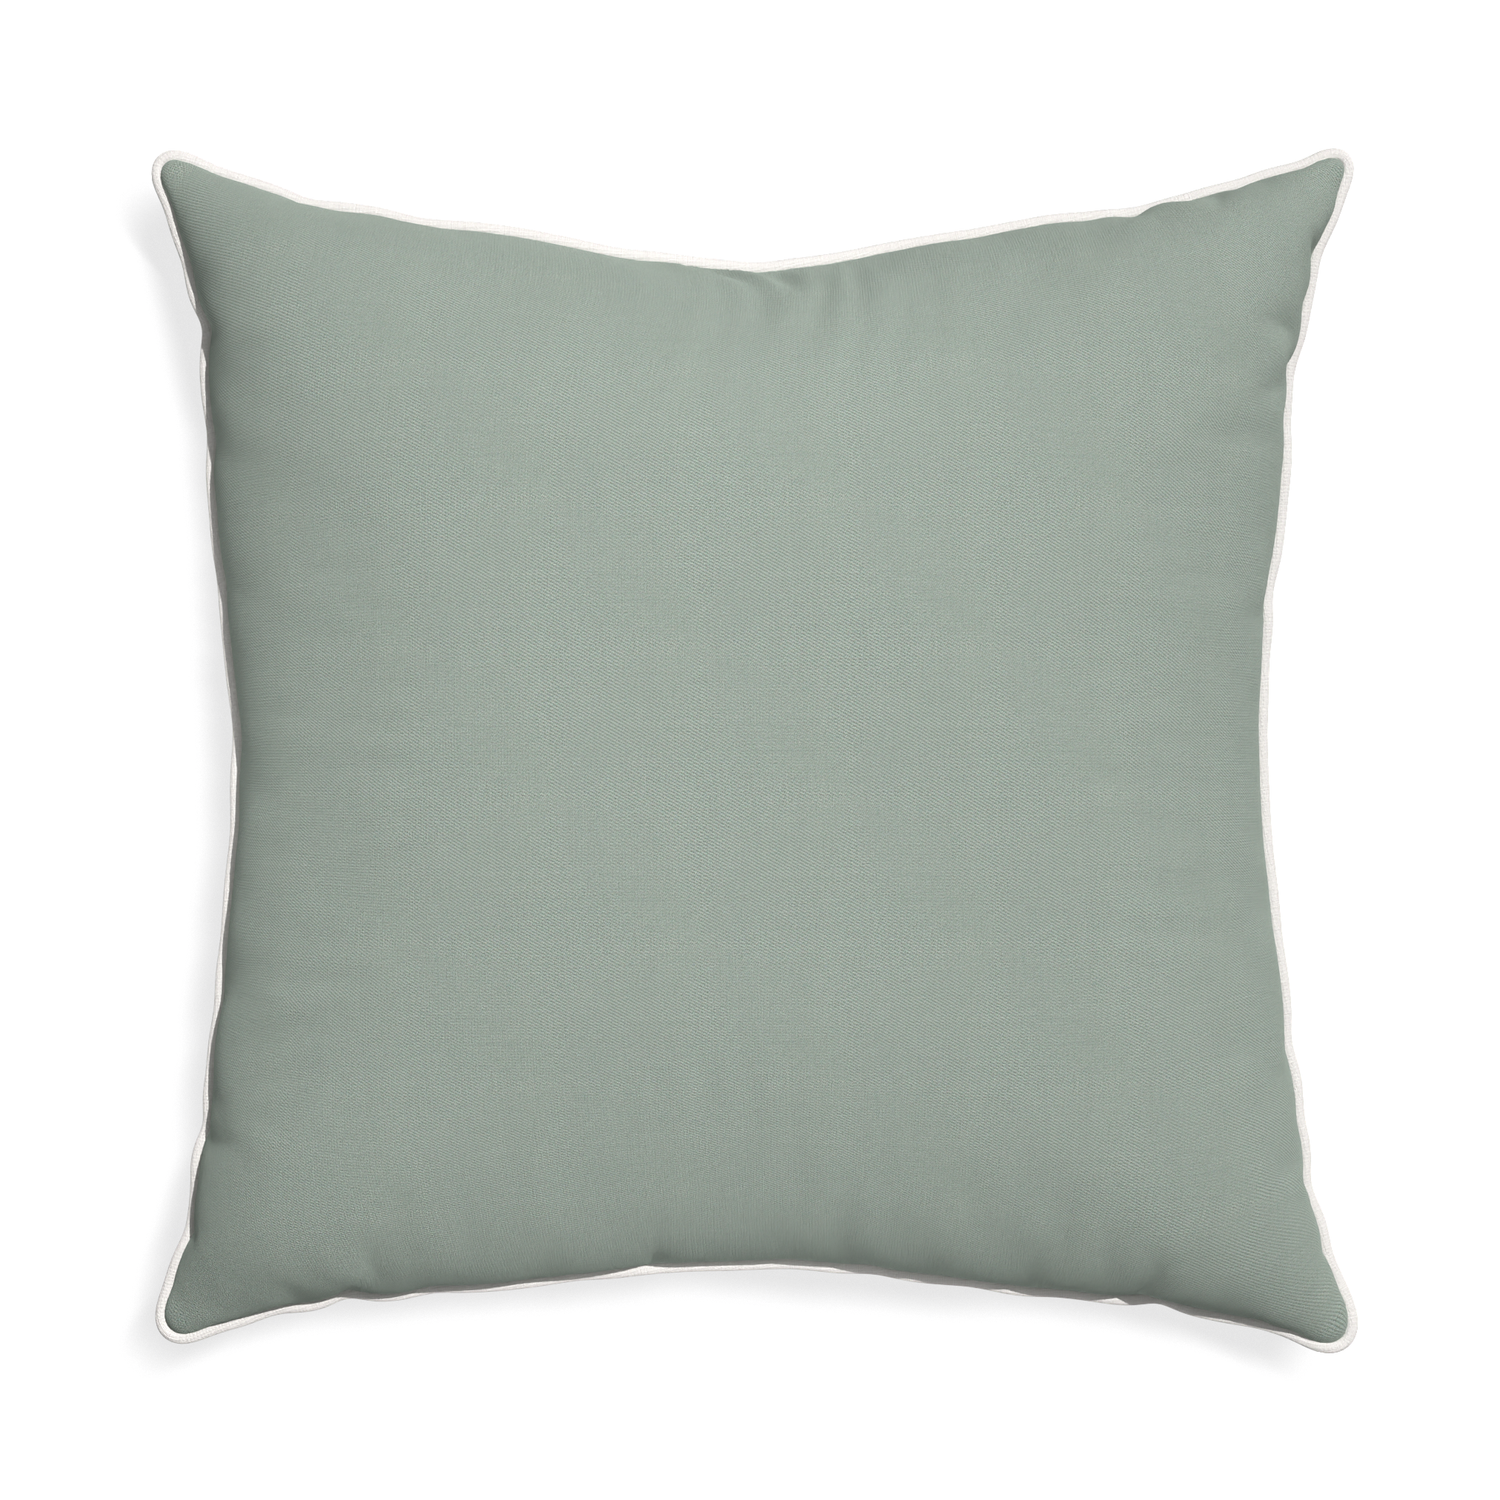 Euro-sham sage custom sage green cottonpillow with snow piping on white background